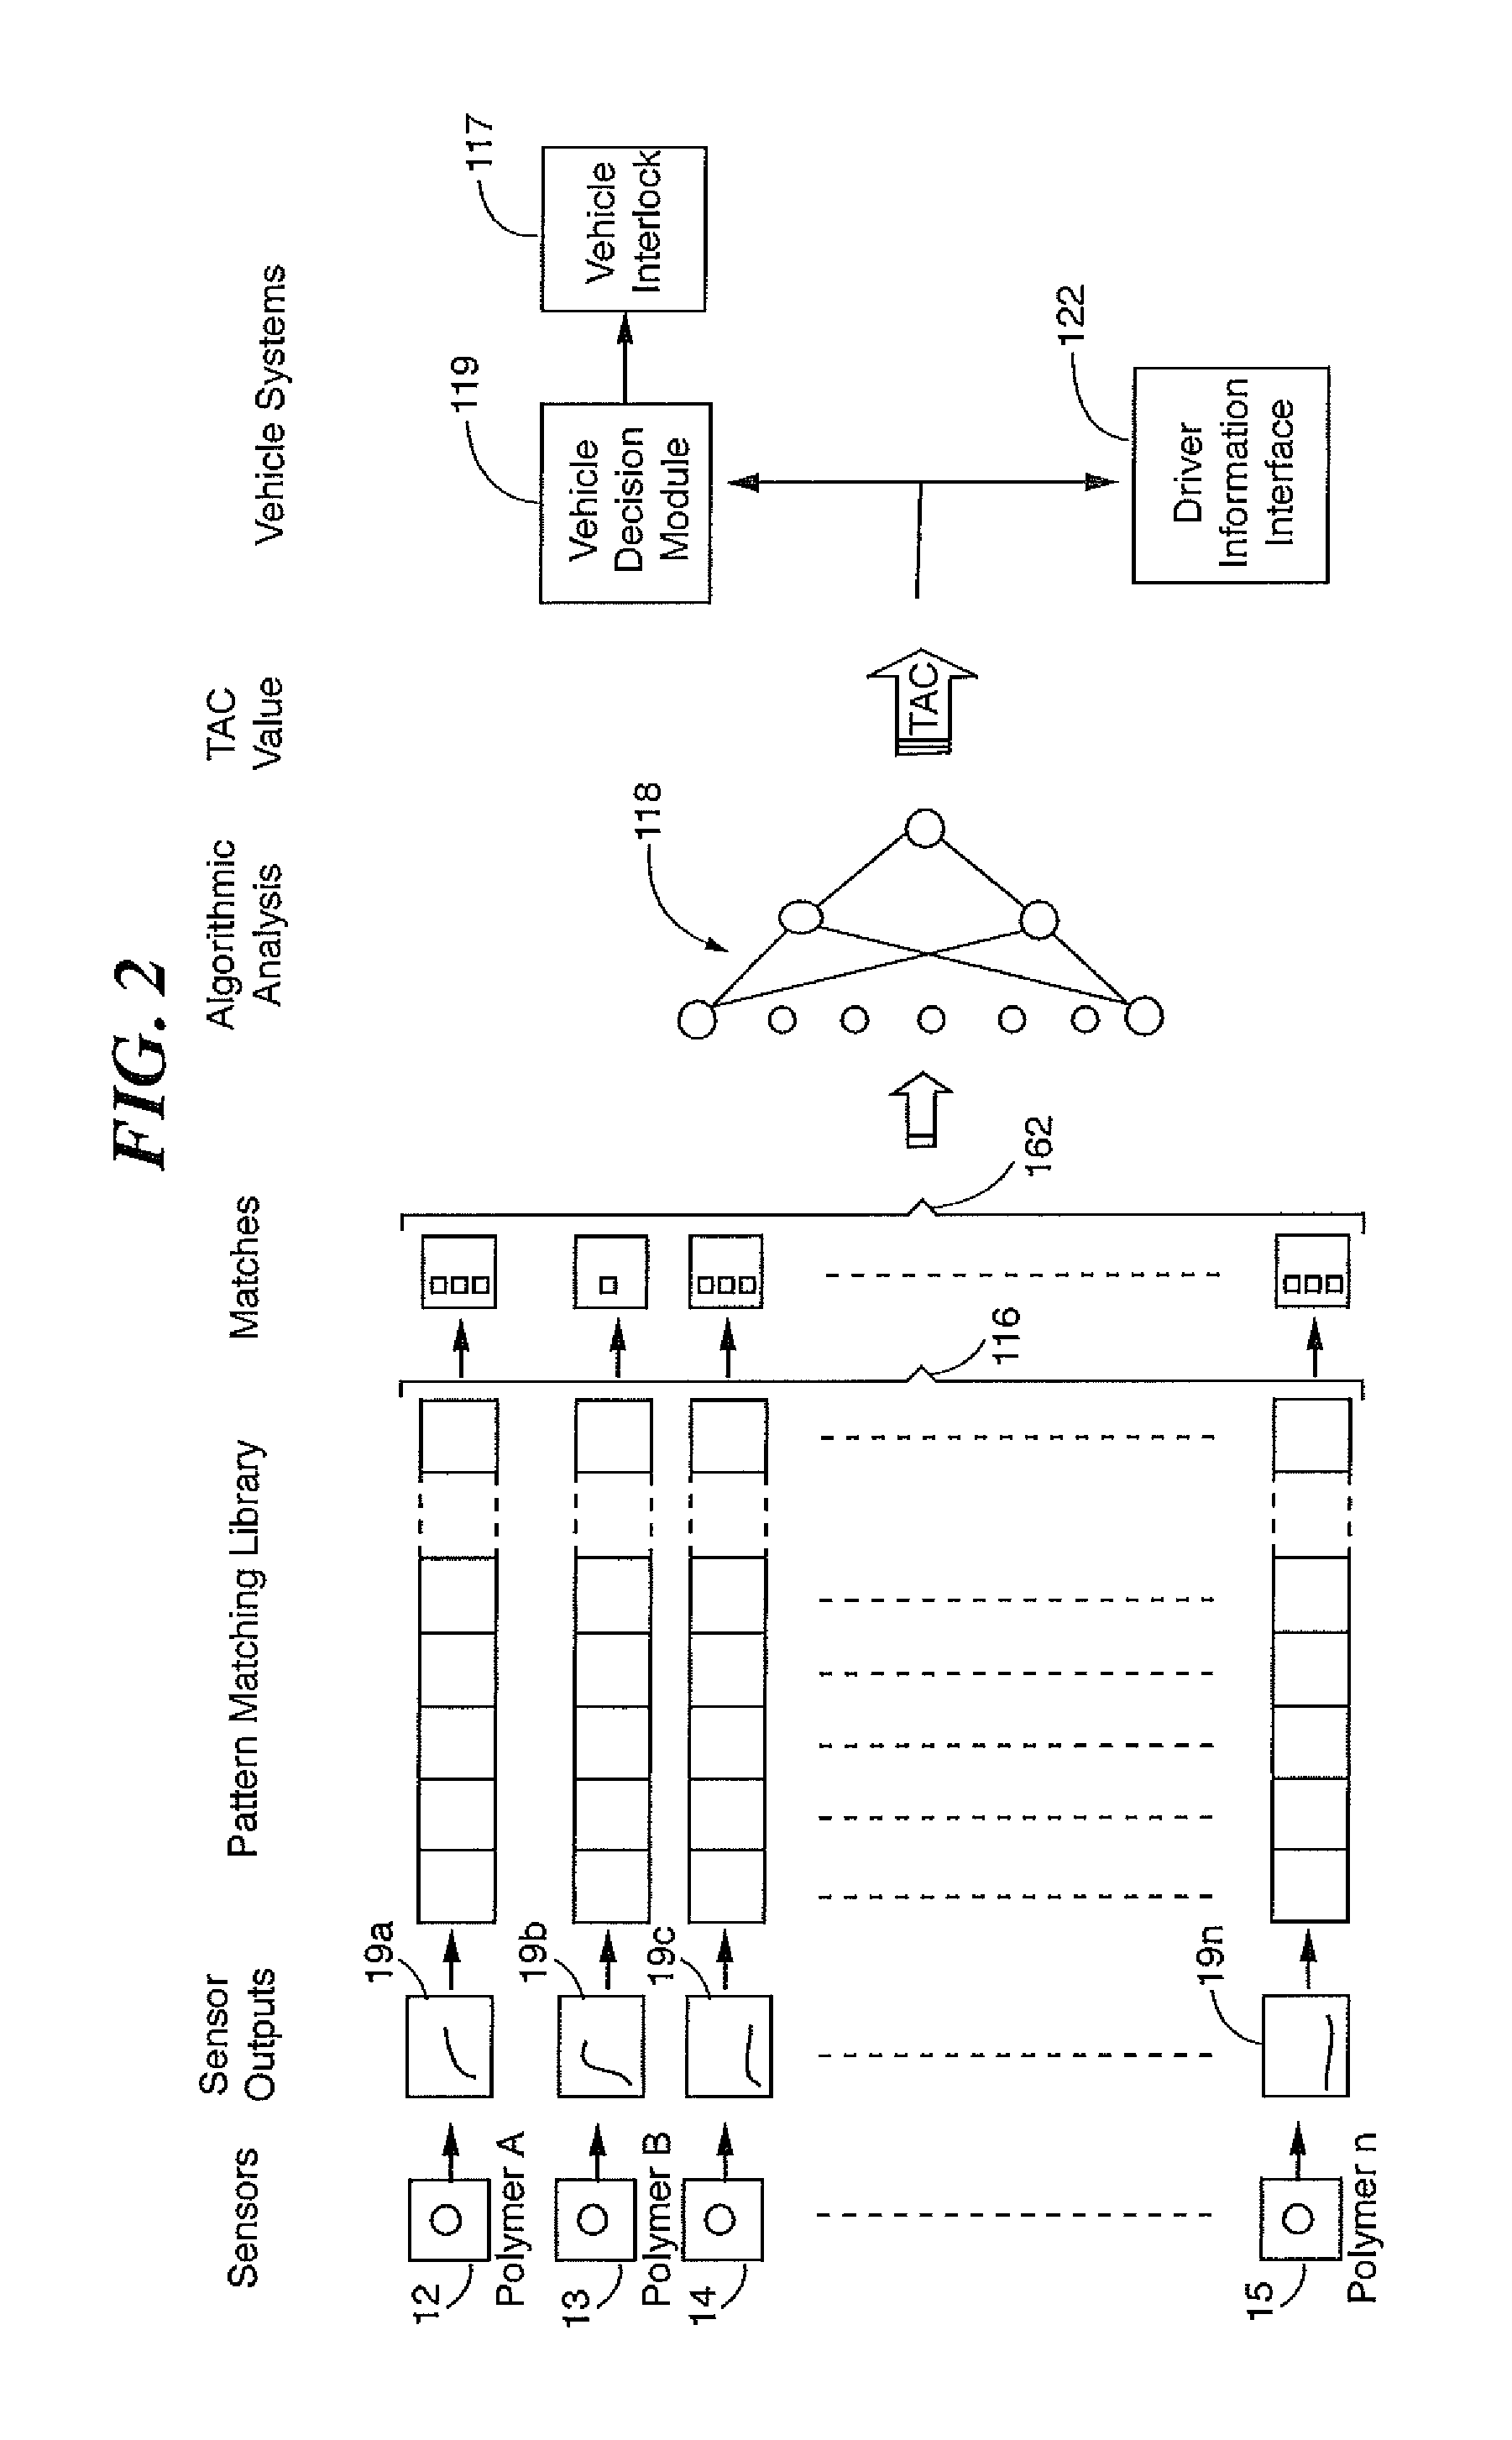 System and method for detecting and measuring ethyl alcohol in the blood of a motorized vehicle driver transdermally and non-invasively in the presence of interferents